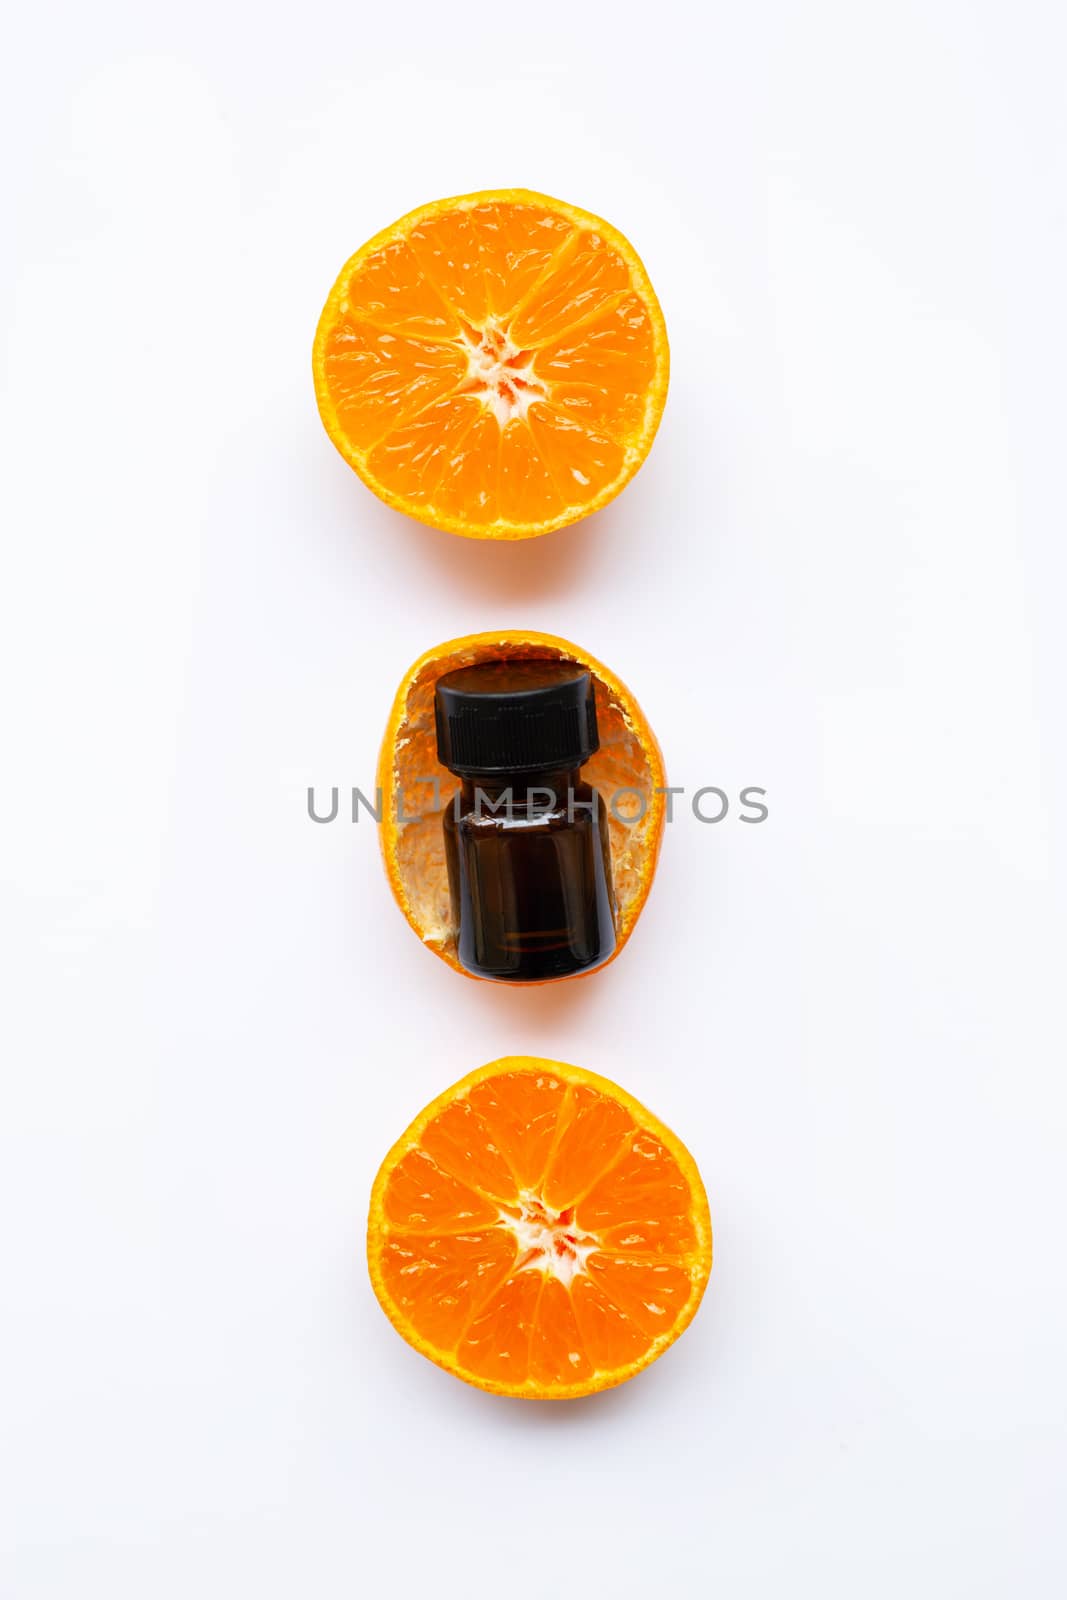 Essential oil of orange on white. by Bowonpat